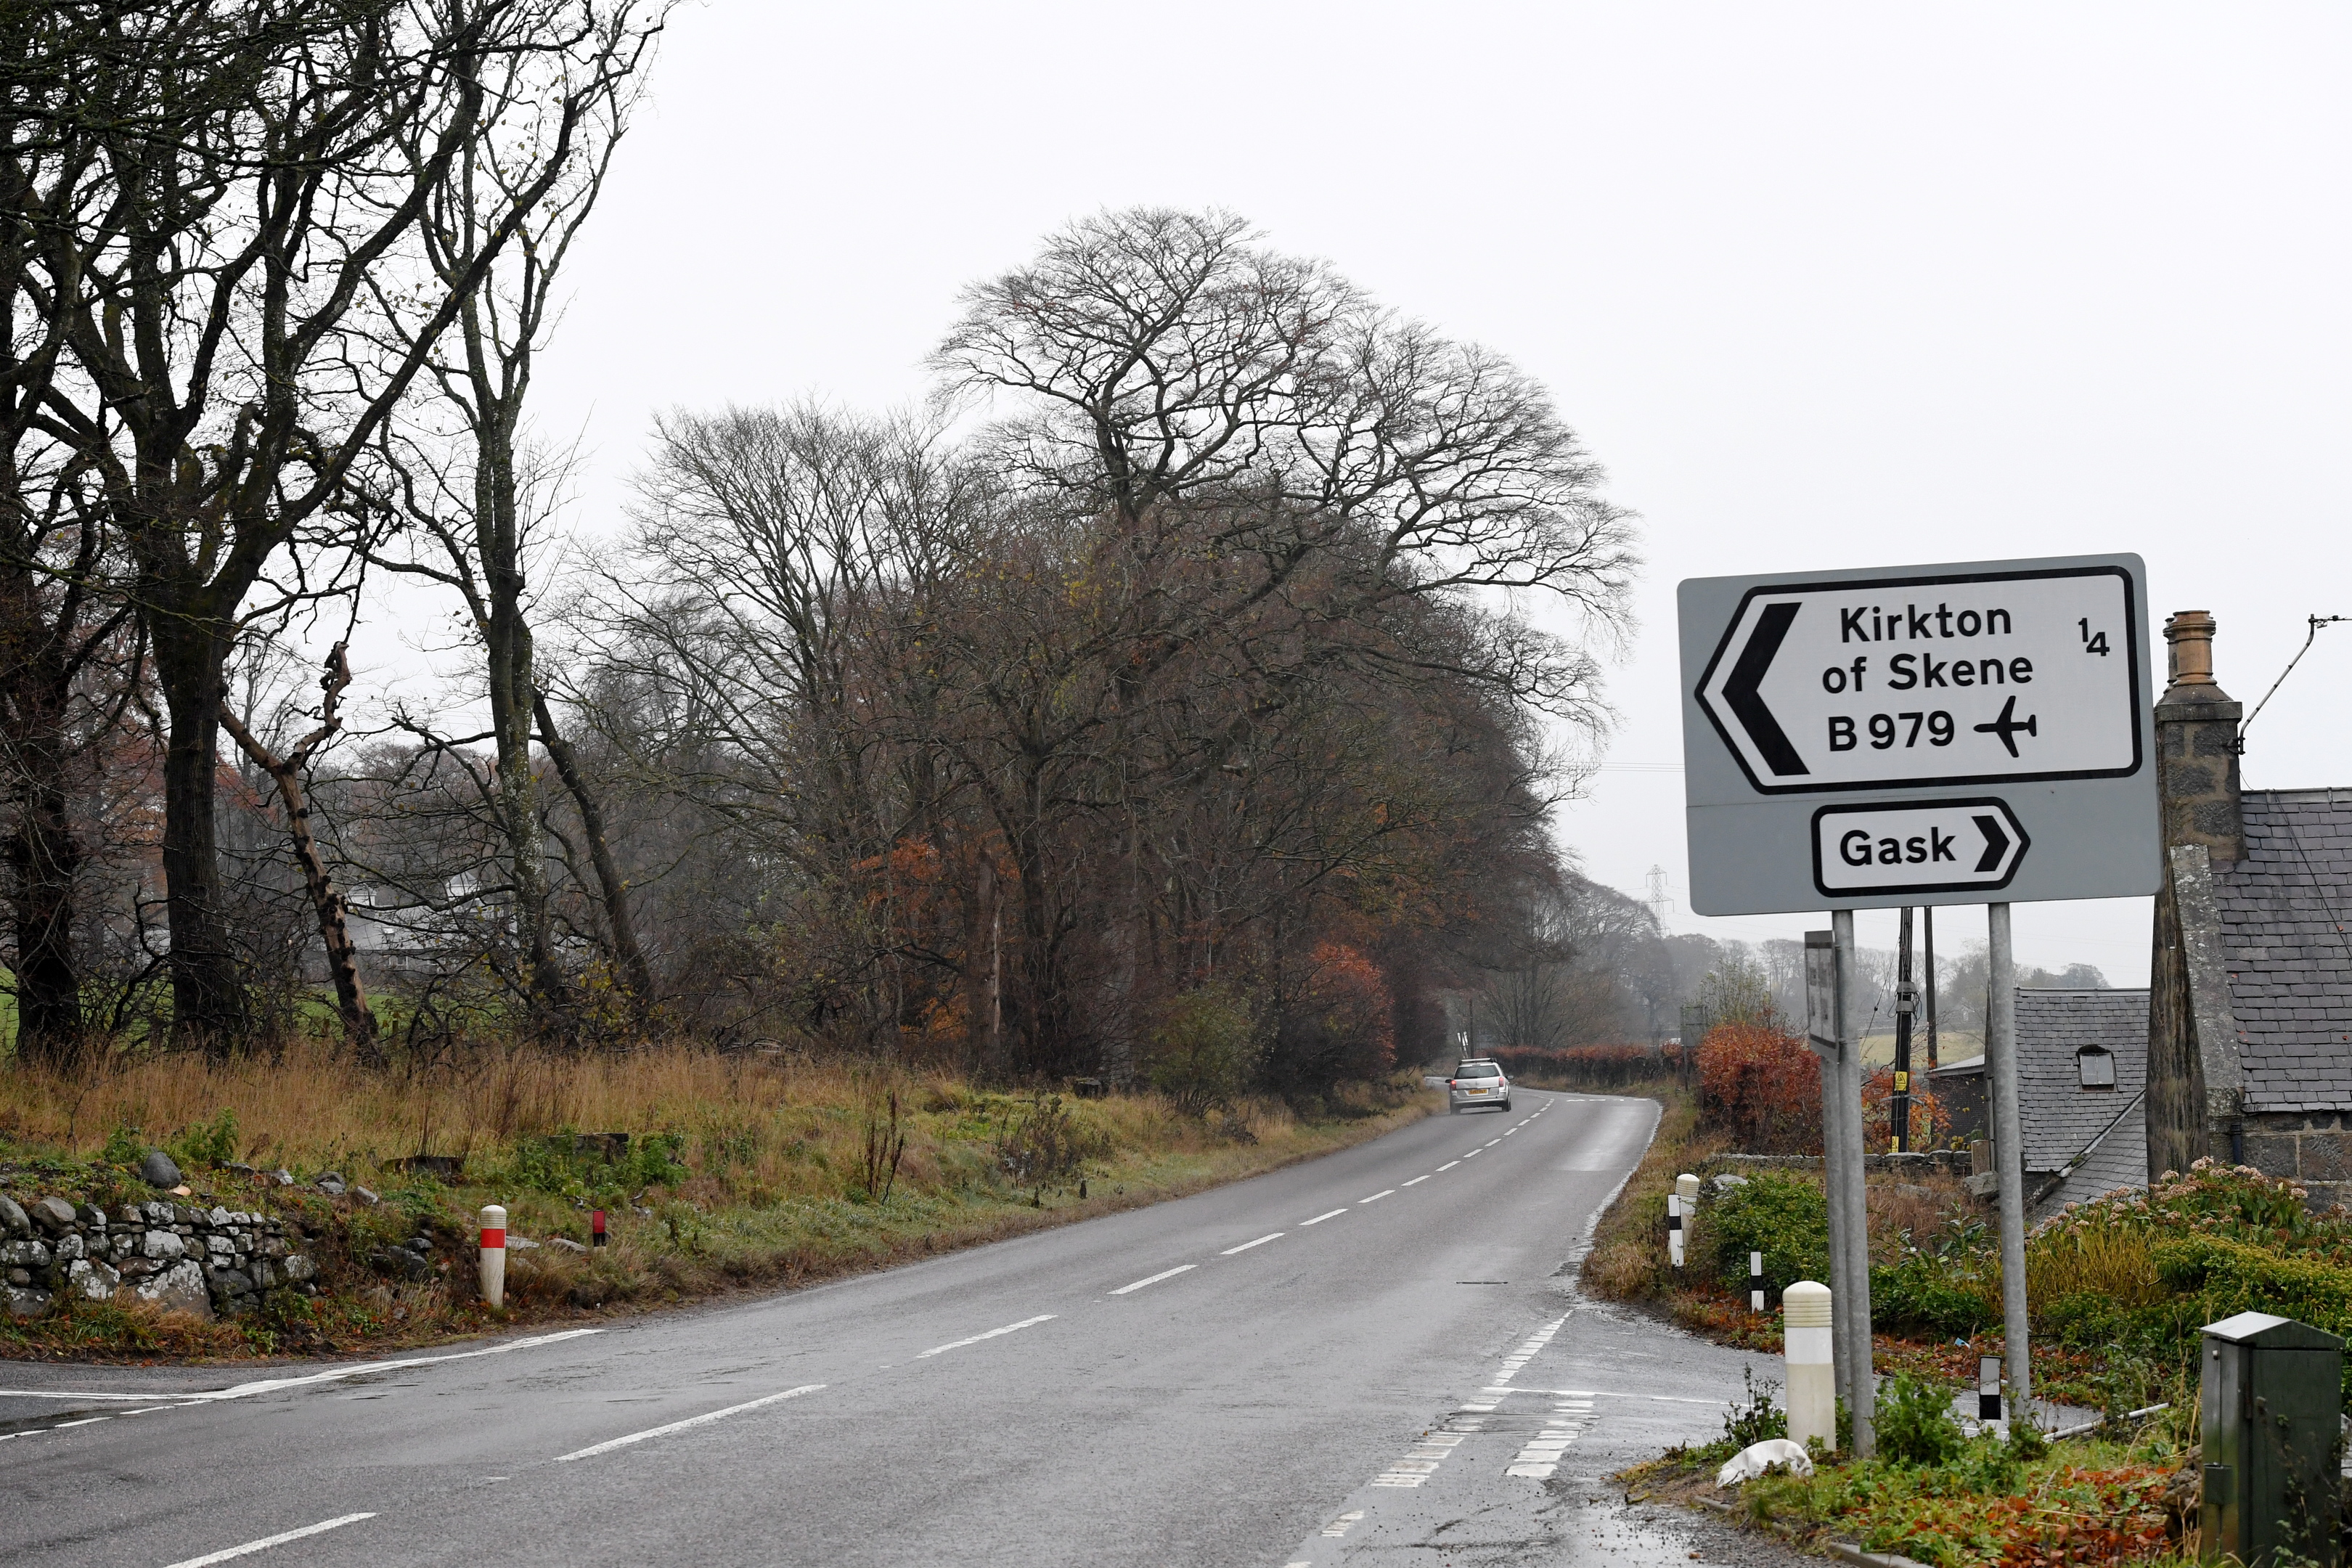 The A944 to Alford at the junction for Kirkton of Skene B979 where plans have been passed to lower the speed limit to 50mph.